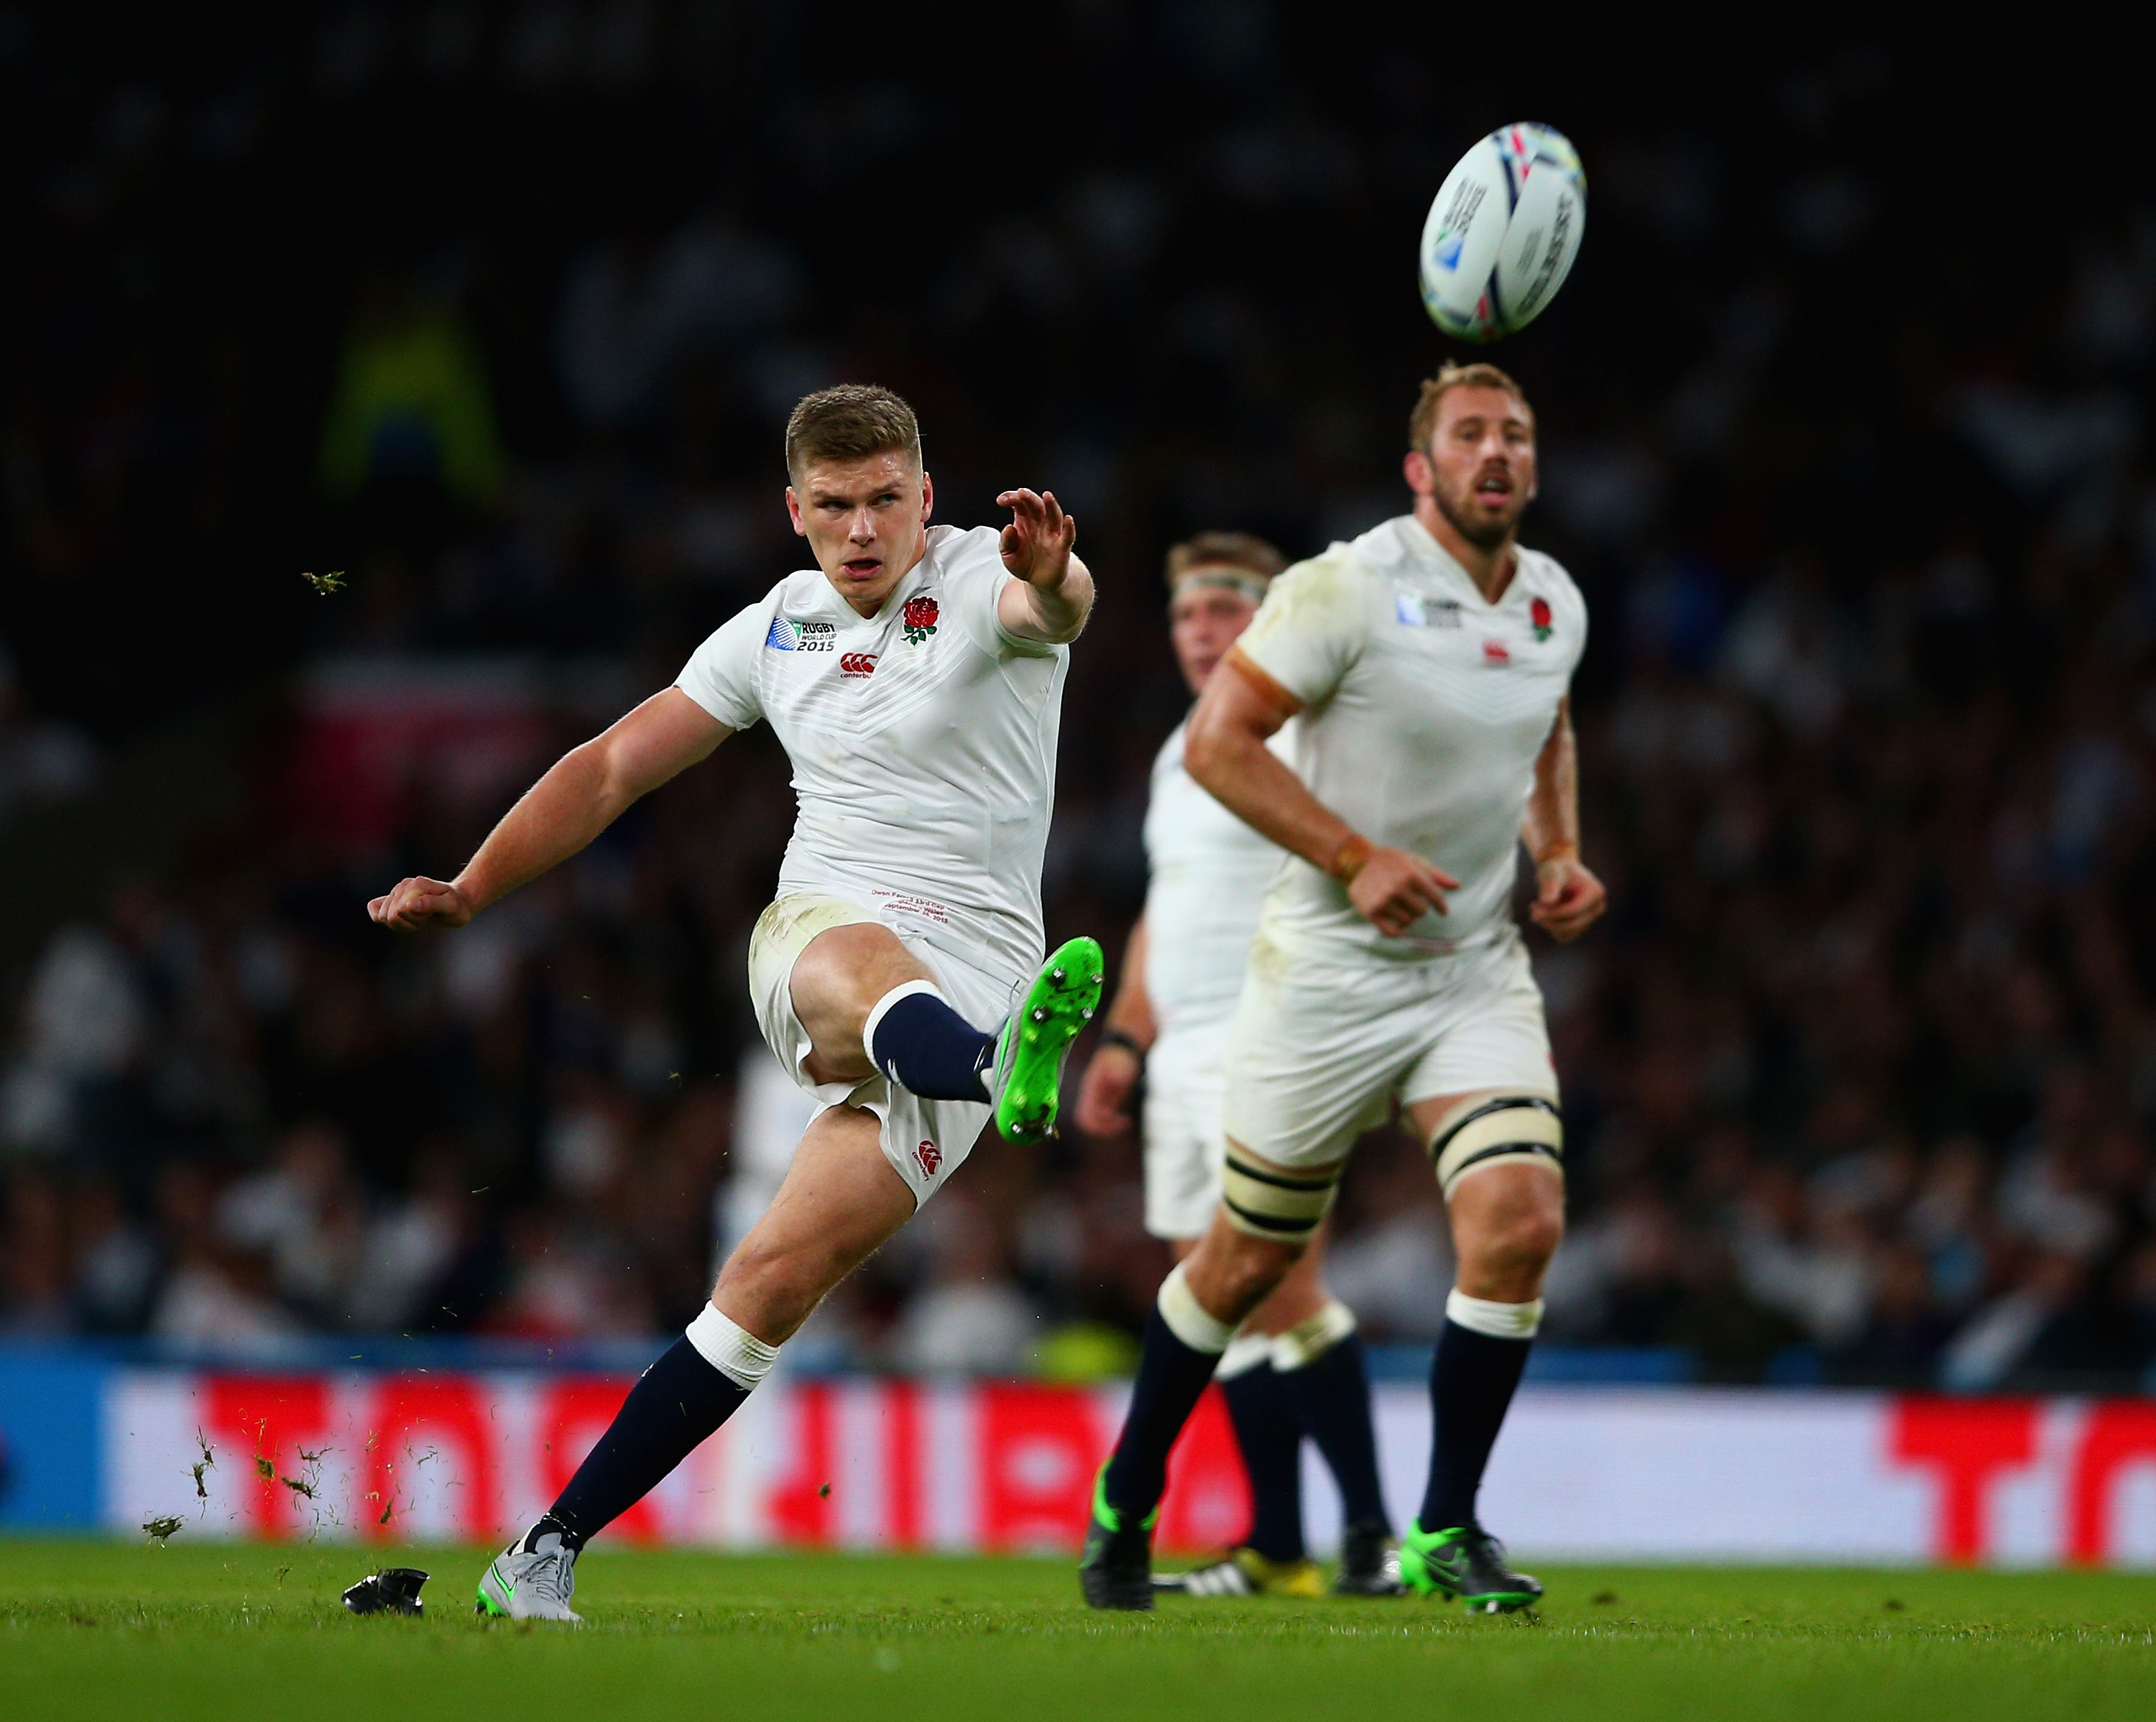 LONDON, ENGLAND - SEPTEMBER 26: Owen Farrell of England kicks a penalty during the 2015 Rugby World Cup Pool A match between England and Wales at Twickenham Stadium on September 26, 2015 in London, United Kingdom. (Photo by Paul Gilham/Getty Images)